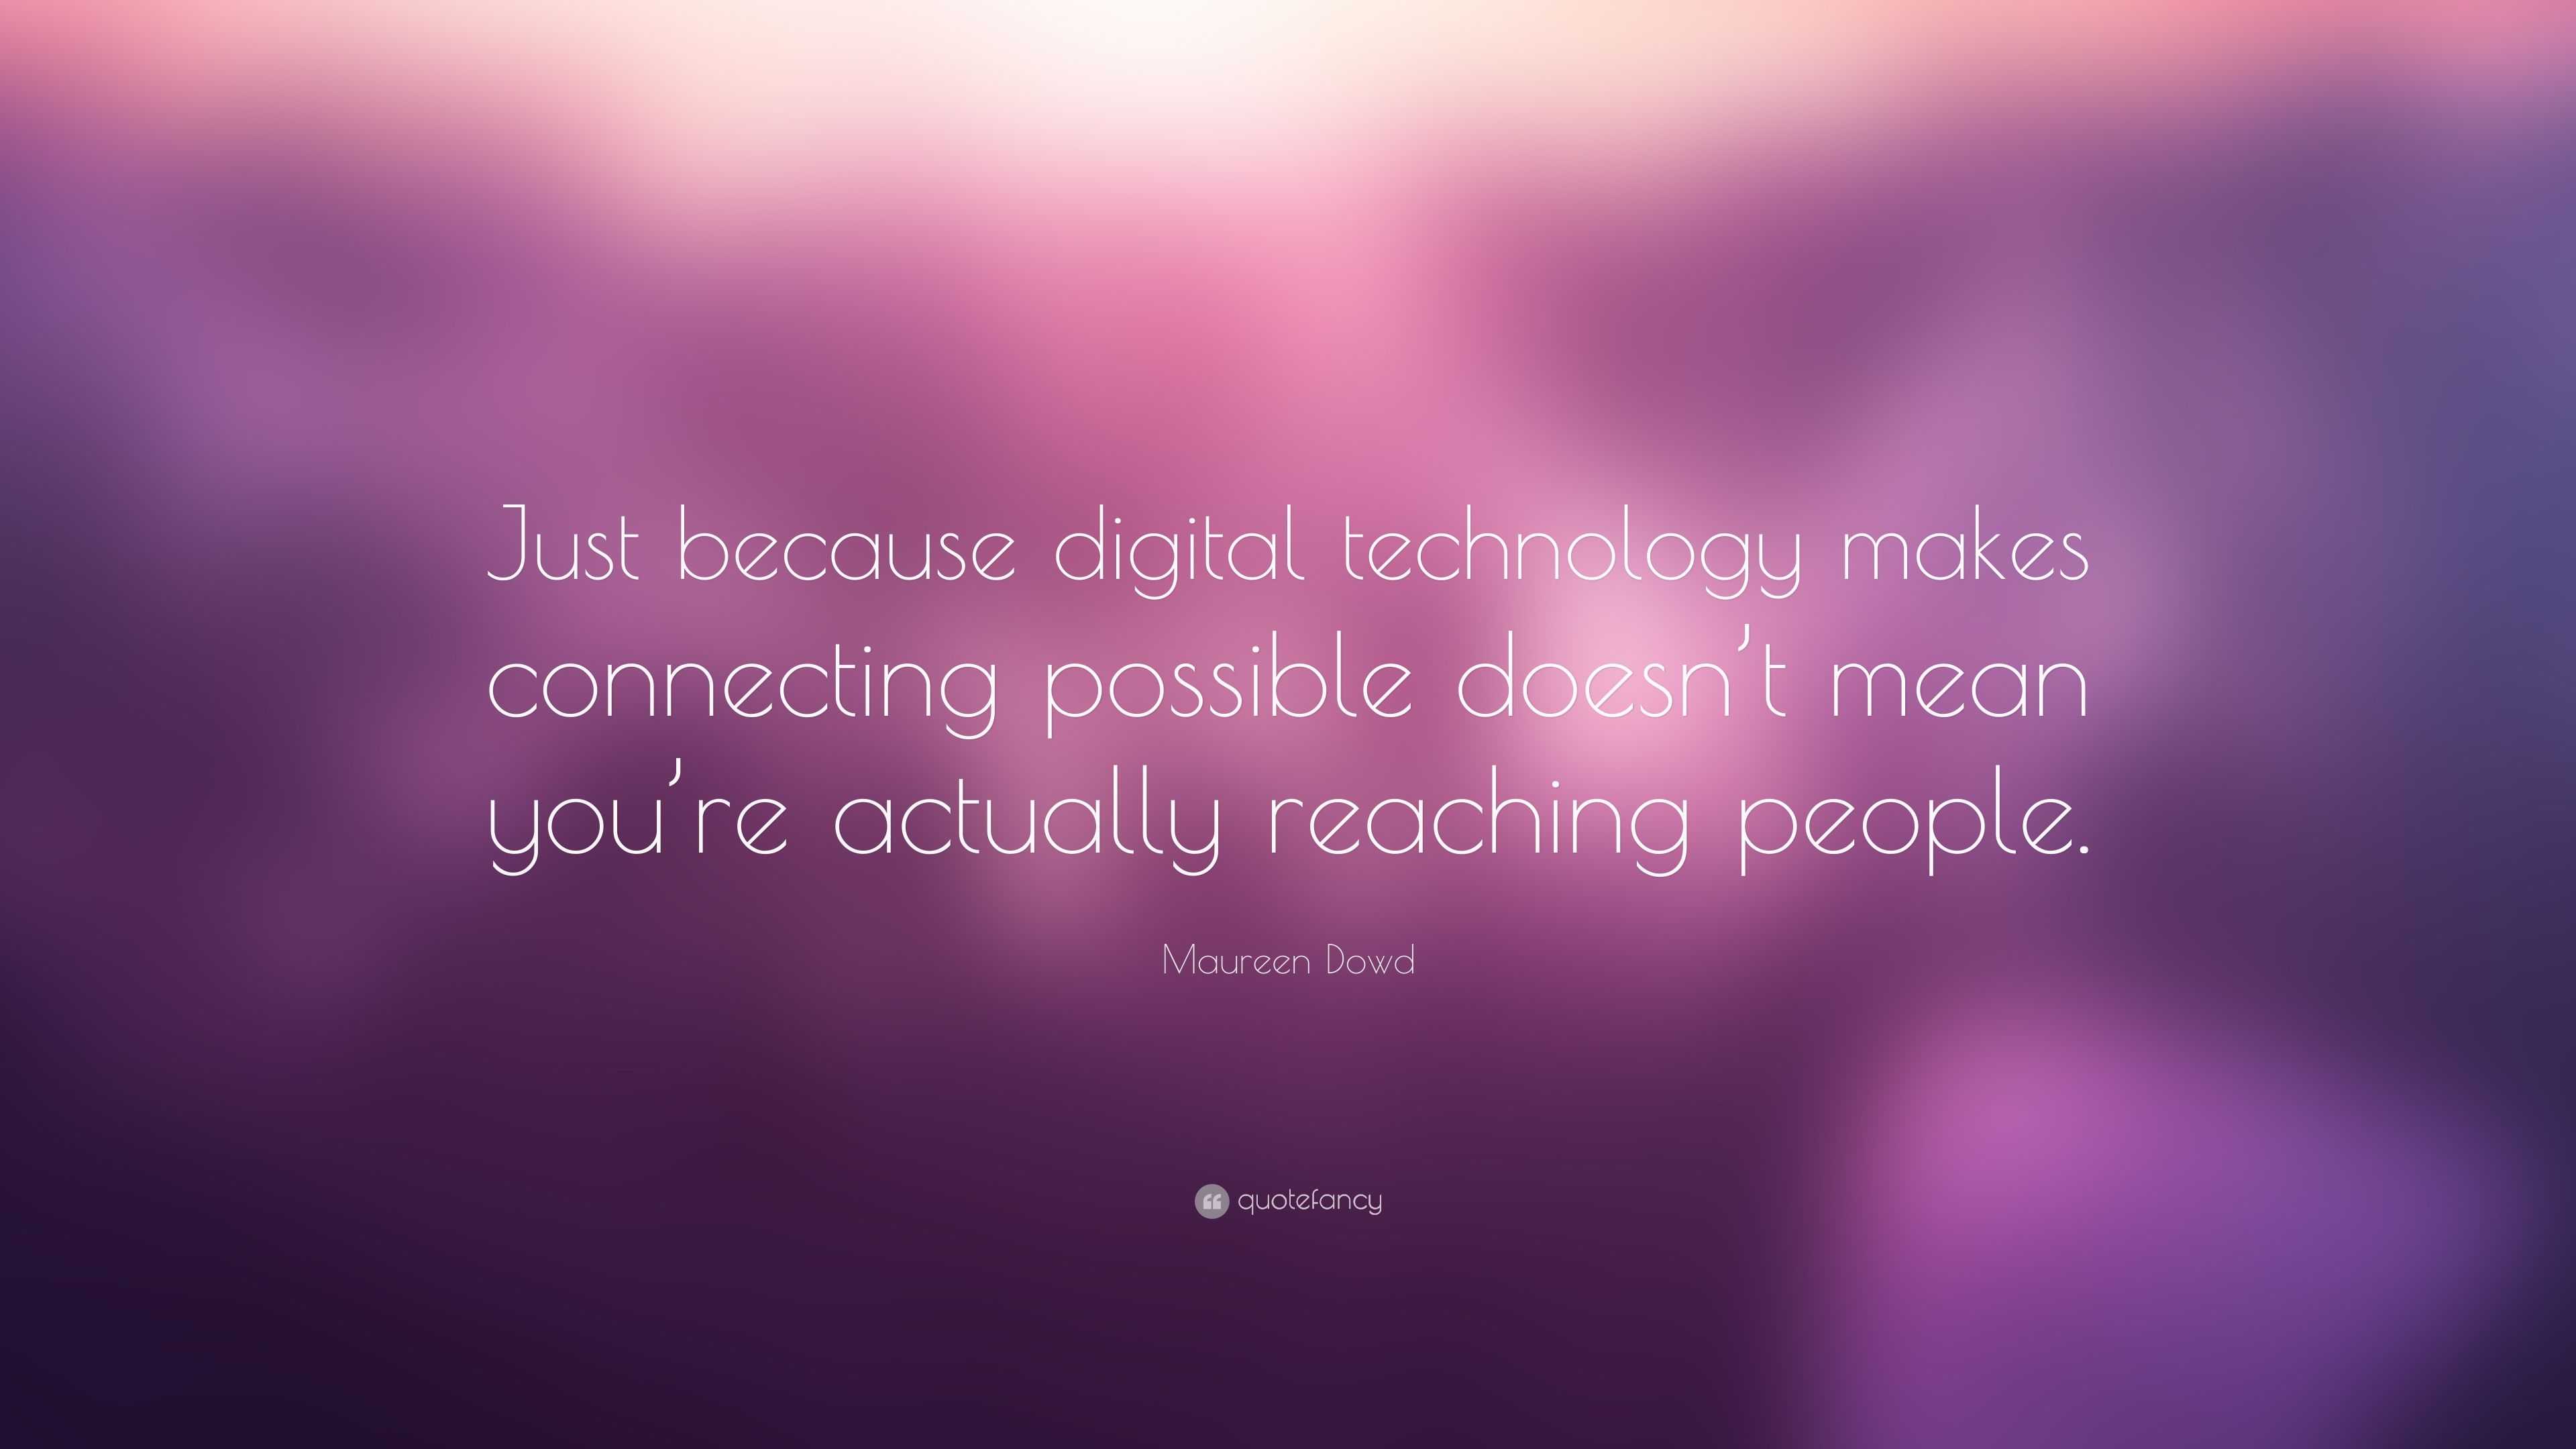 Maureen Dowd Quote: “Just because digital technology makes connecting ...